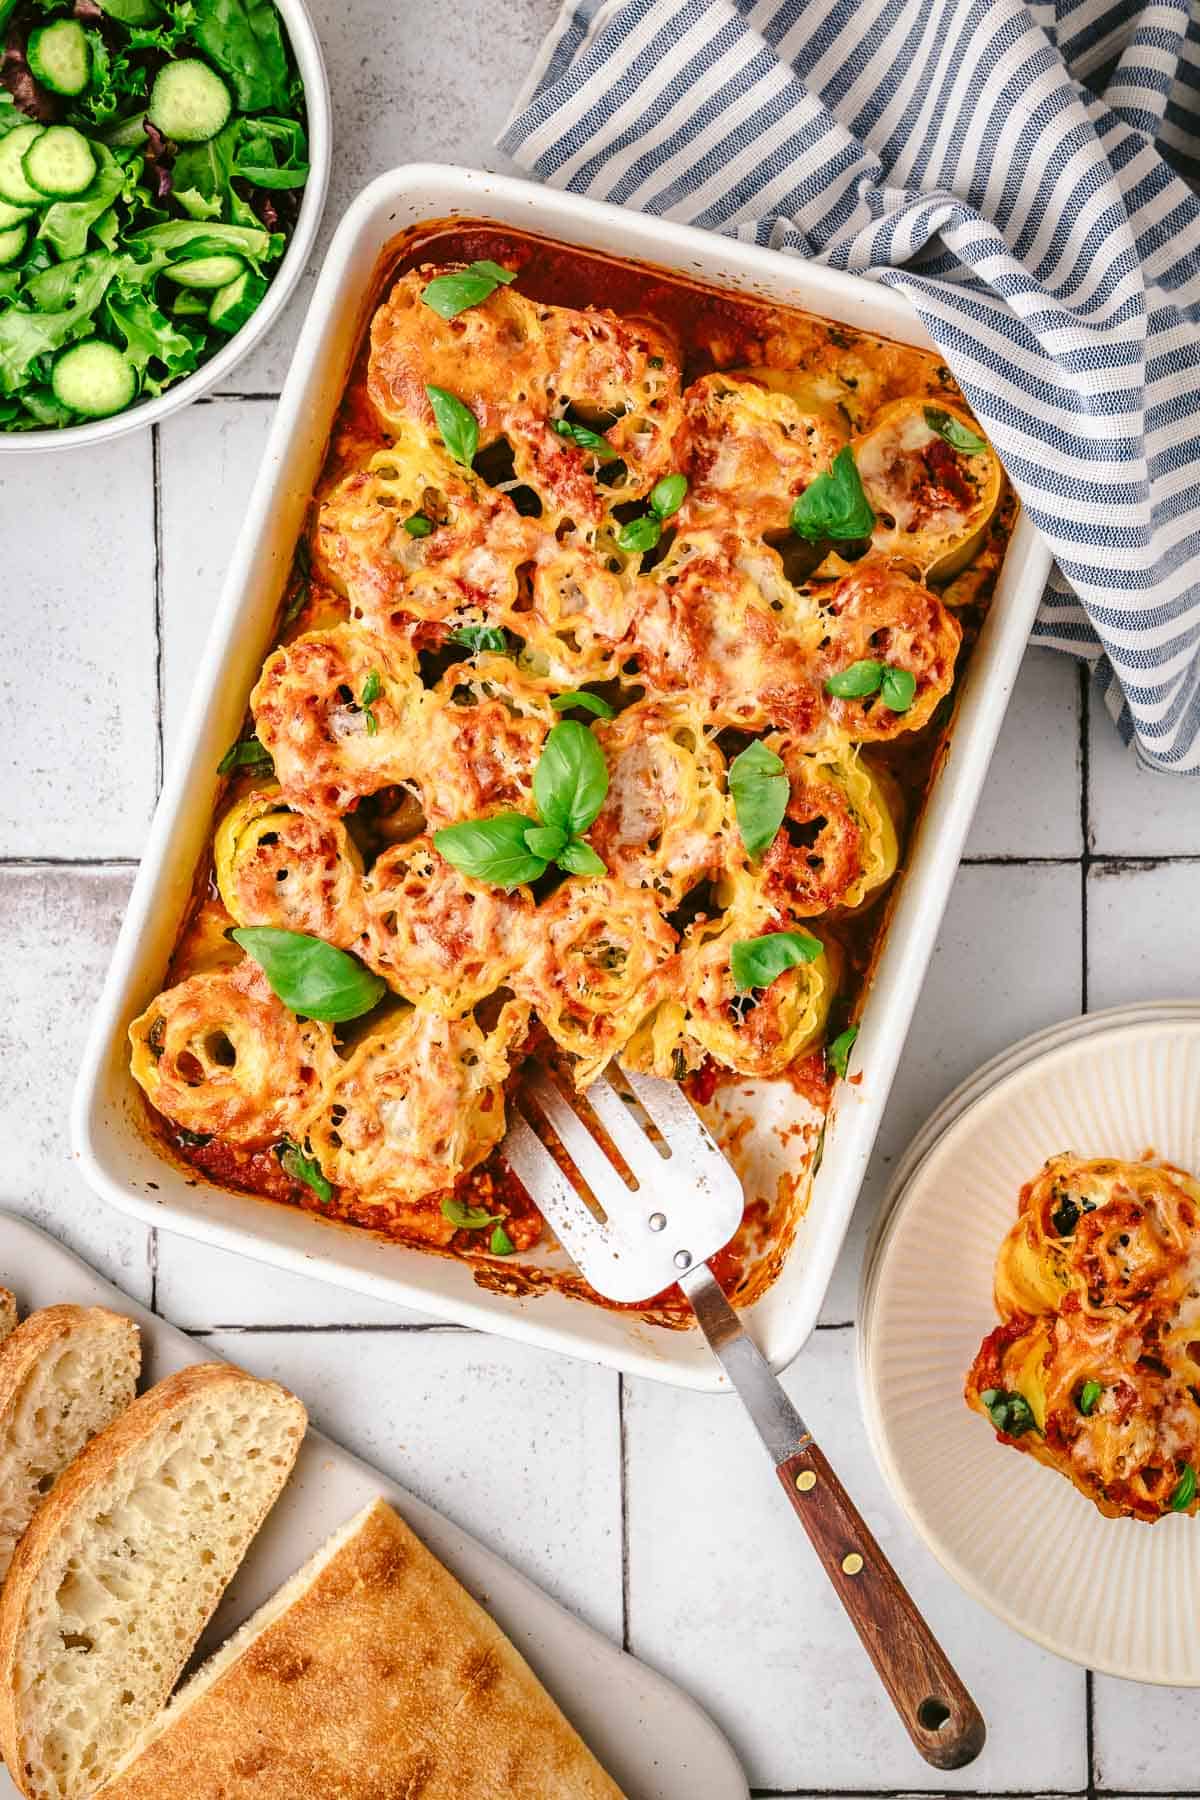 baked lasagna roll ups in a baking dish with a spatula topped with basil leaves next to a bowl of salad, a plate of bread, and another plate with 2 lasagna roll ups.